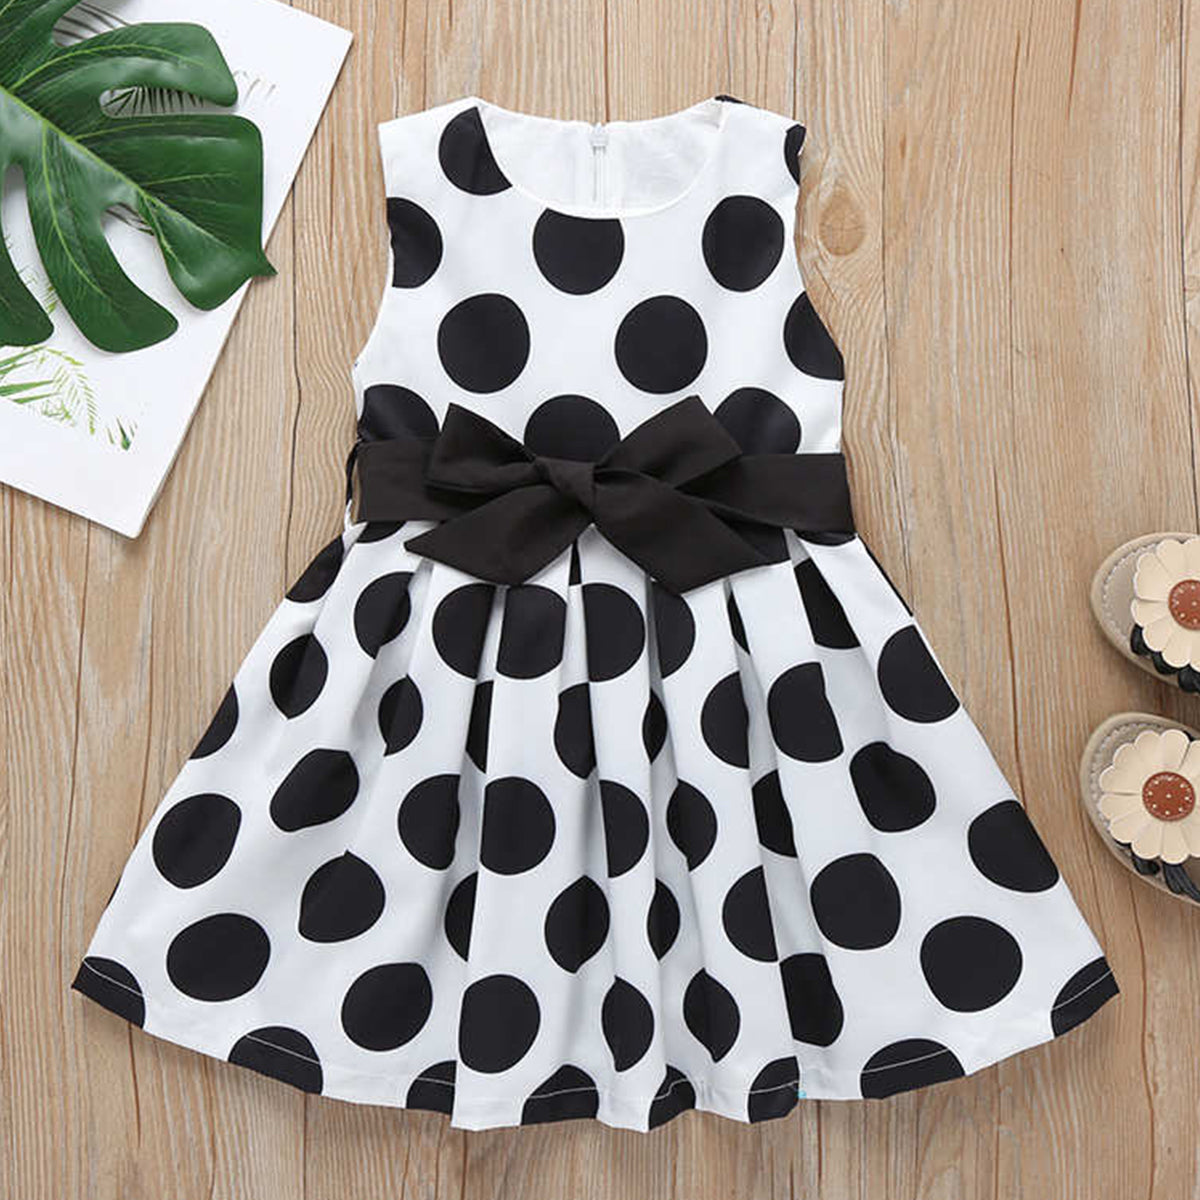 Stylish Looking Designer Pink Fish & Black_White Dot Top Dresses (Combo Pack Of 2) for Kids.